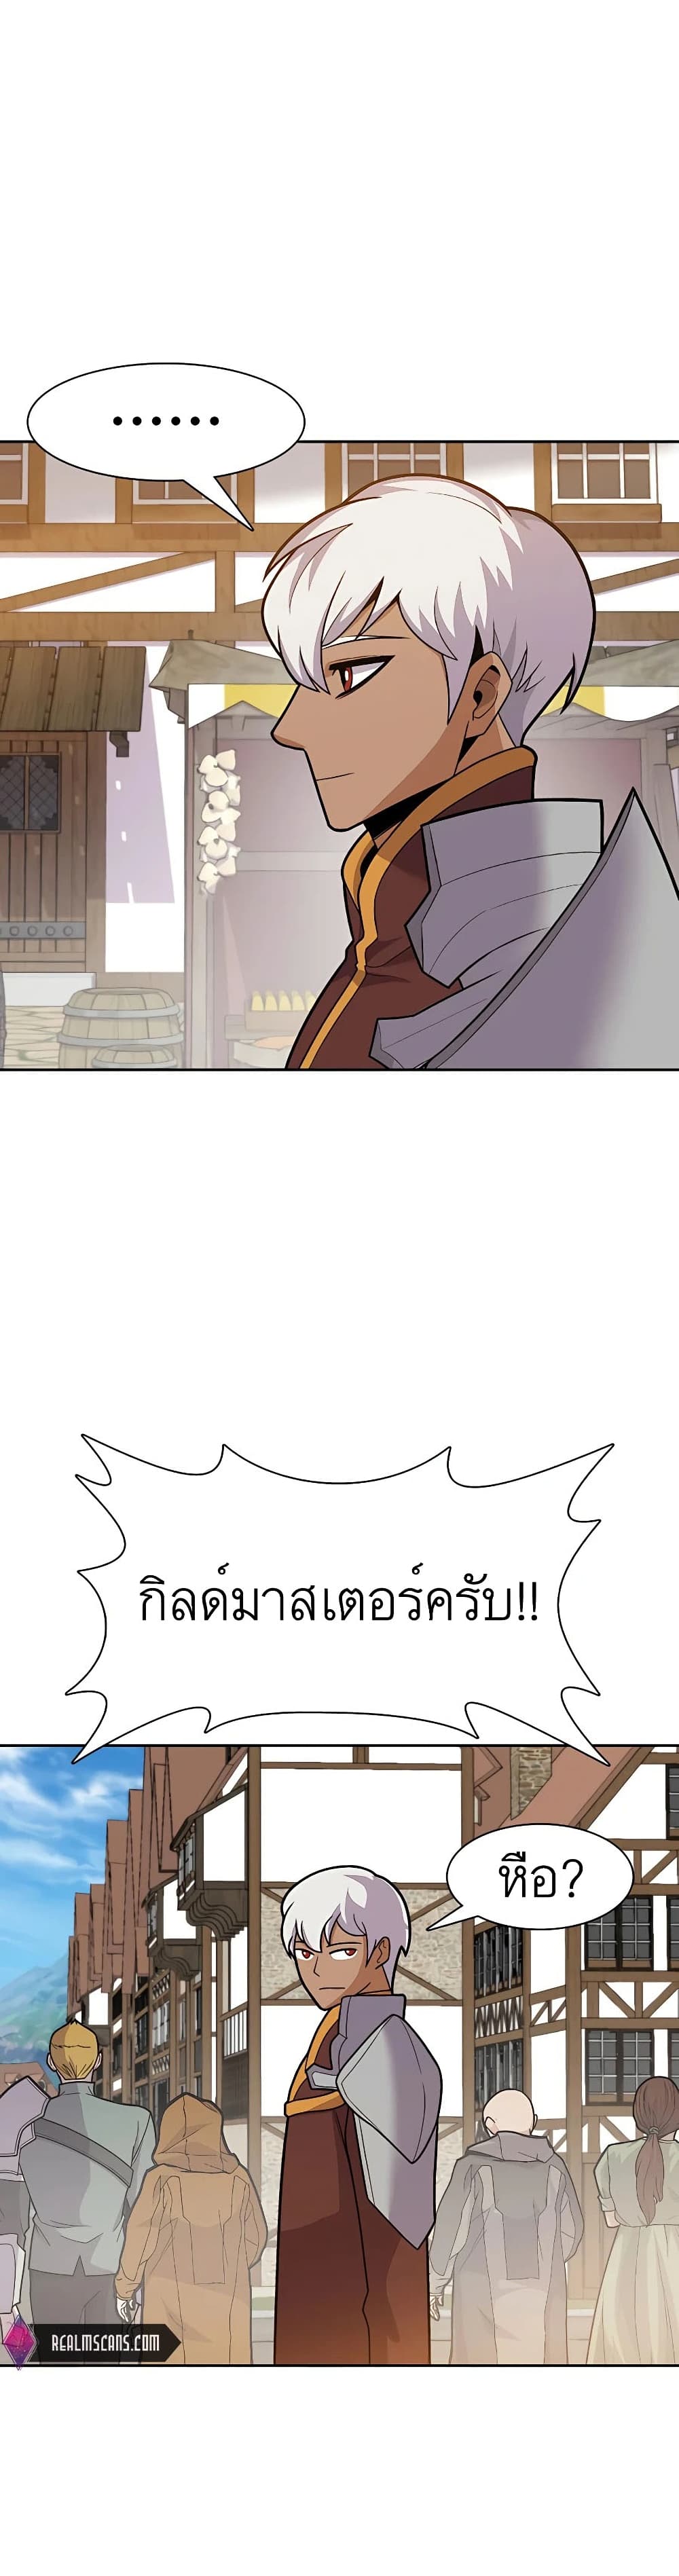 Raising Newbie Heroes In Another World ตอนที่ 18 (3)